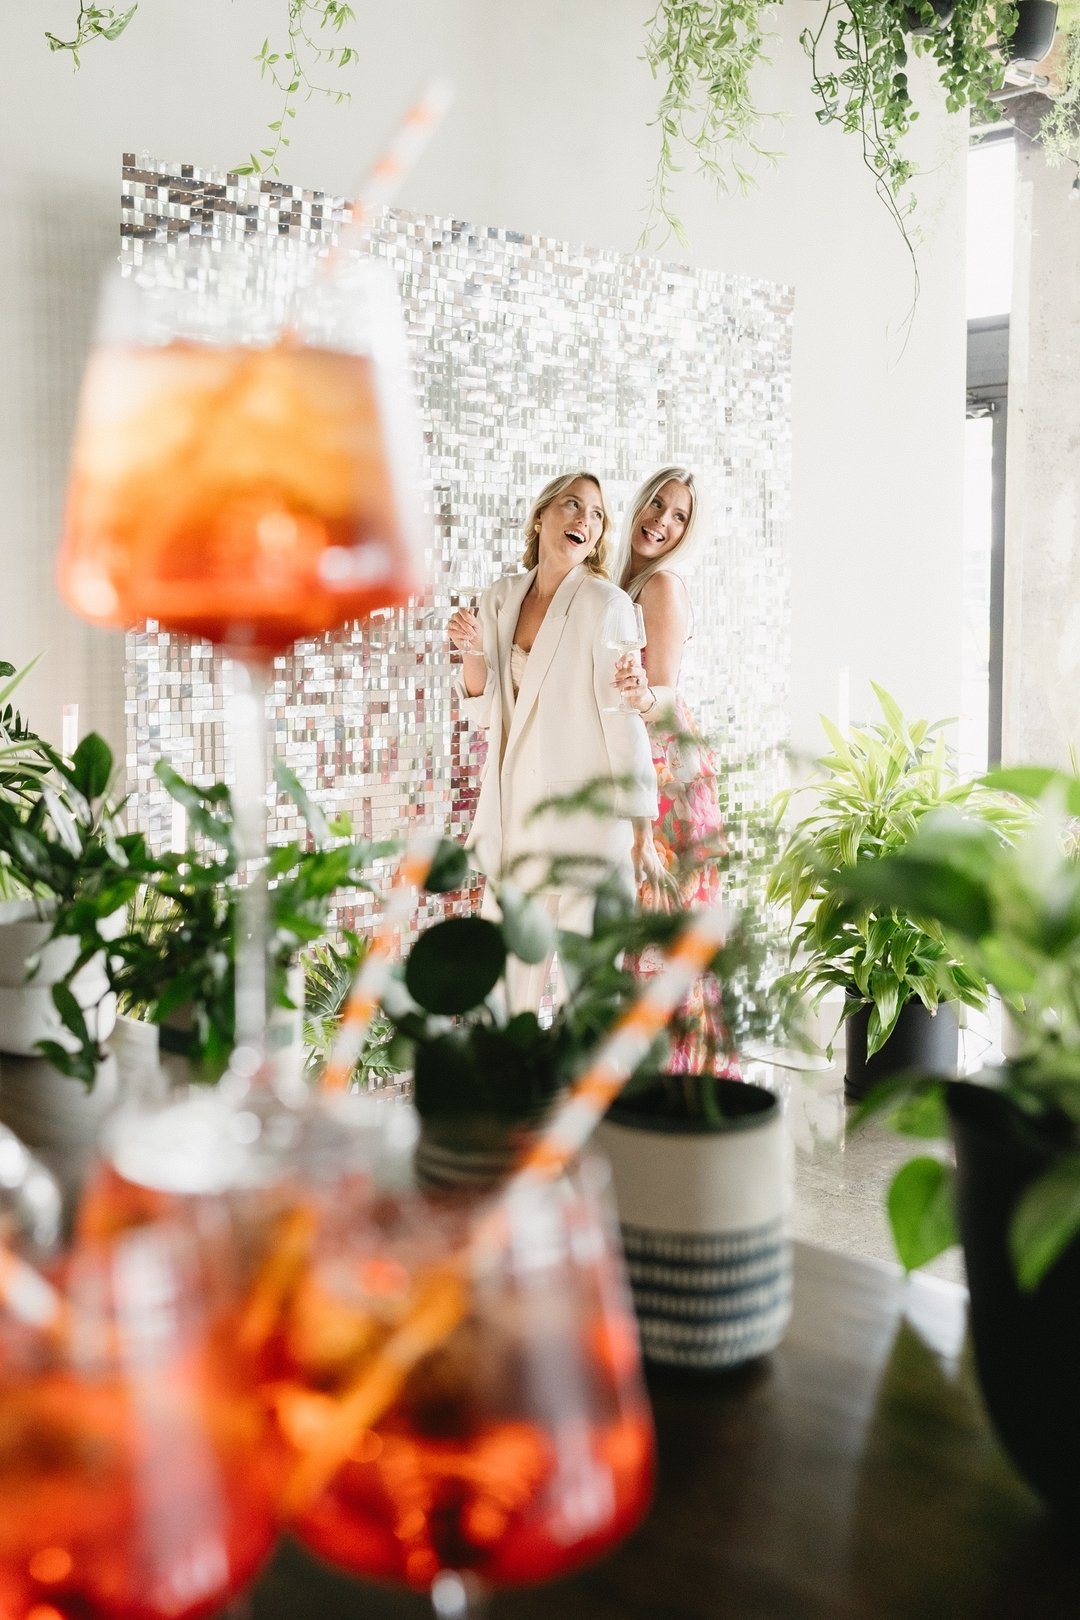 Happy World Cocktail Day! Let the good times &amp; great cocktails roll. Here's to photo booth fun, cocktails (and mocktails!), and tangible memories! 

#floridawedding #floridaweddingplanner #floridaeventplanner #southfloridaevents #southfloridaphot